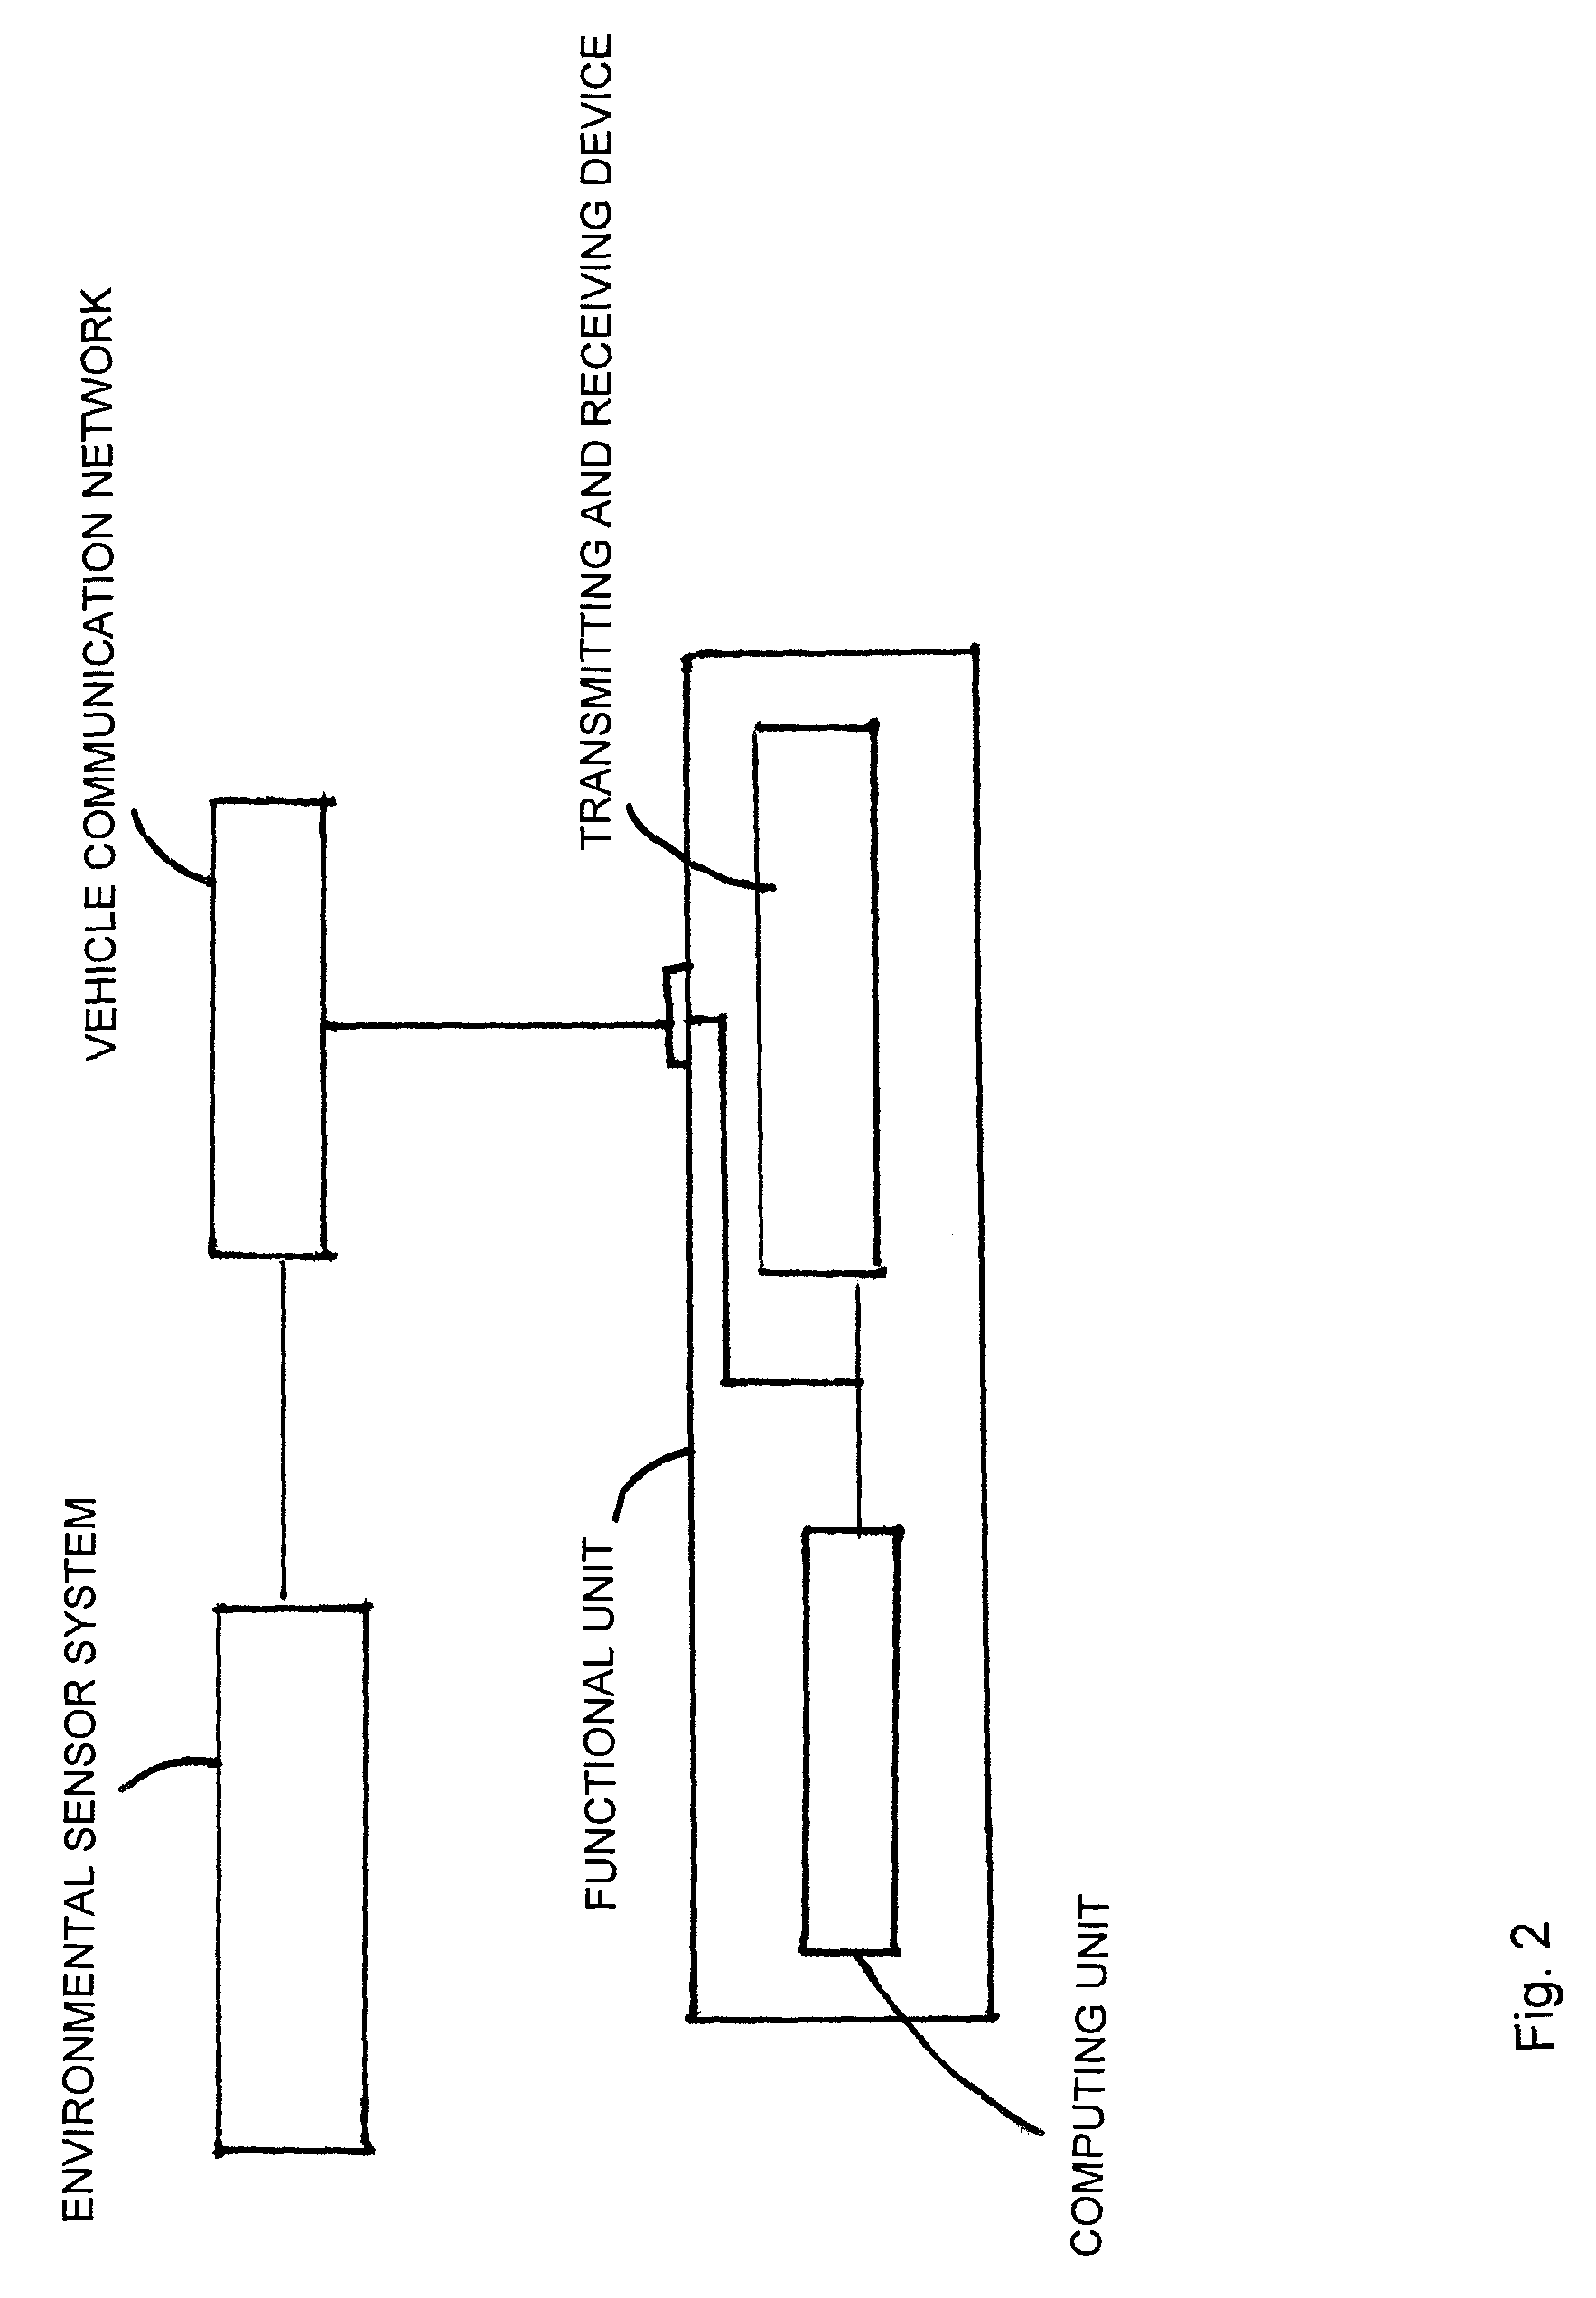 Method for adaptive channel estimation for wireless communication between a vehicle and other communication subscribers using the measurement results of the environment sensor system